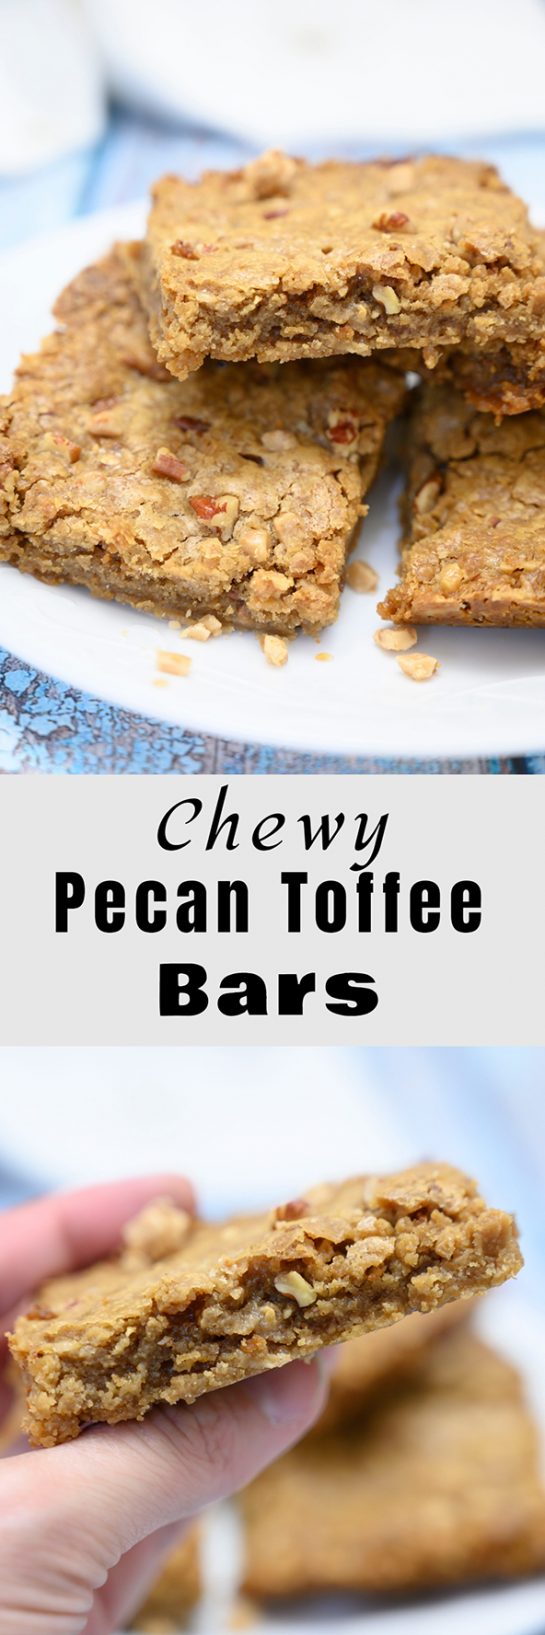 This recipe for Pecan Toffee Bars would be fabulous on any dessert platter for the holidays or any occasion. They also make for an awesome edible gift!